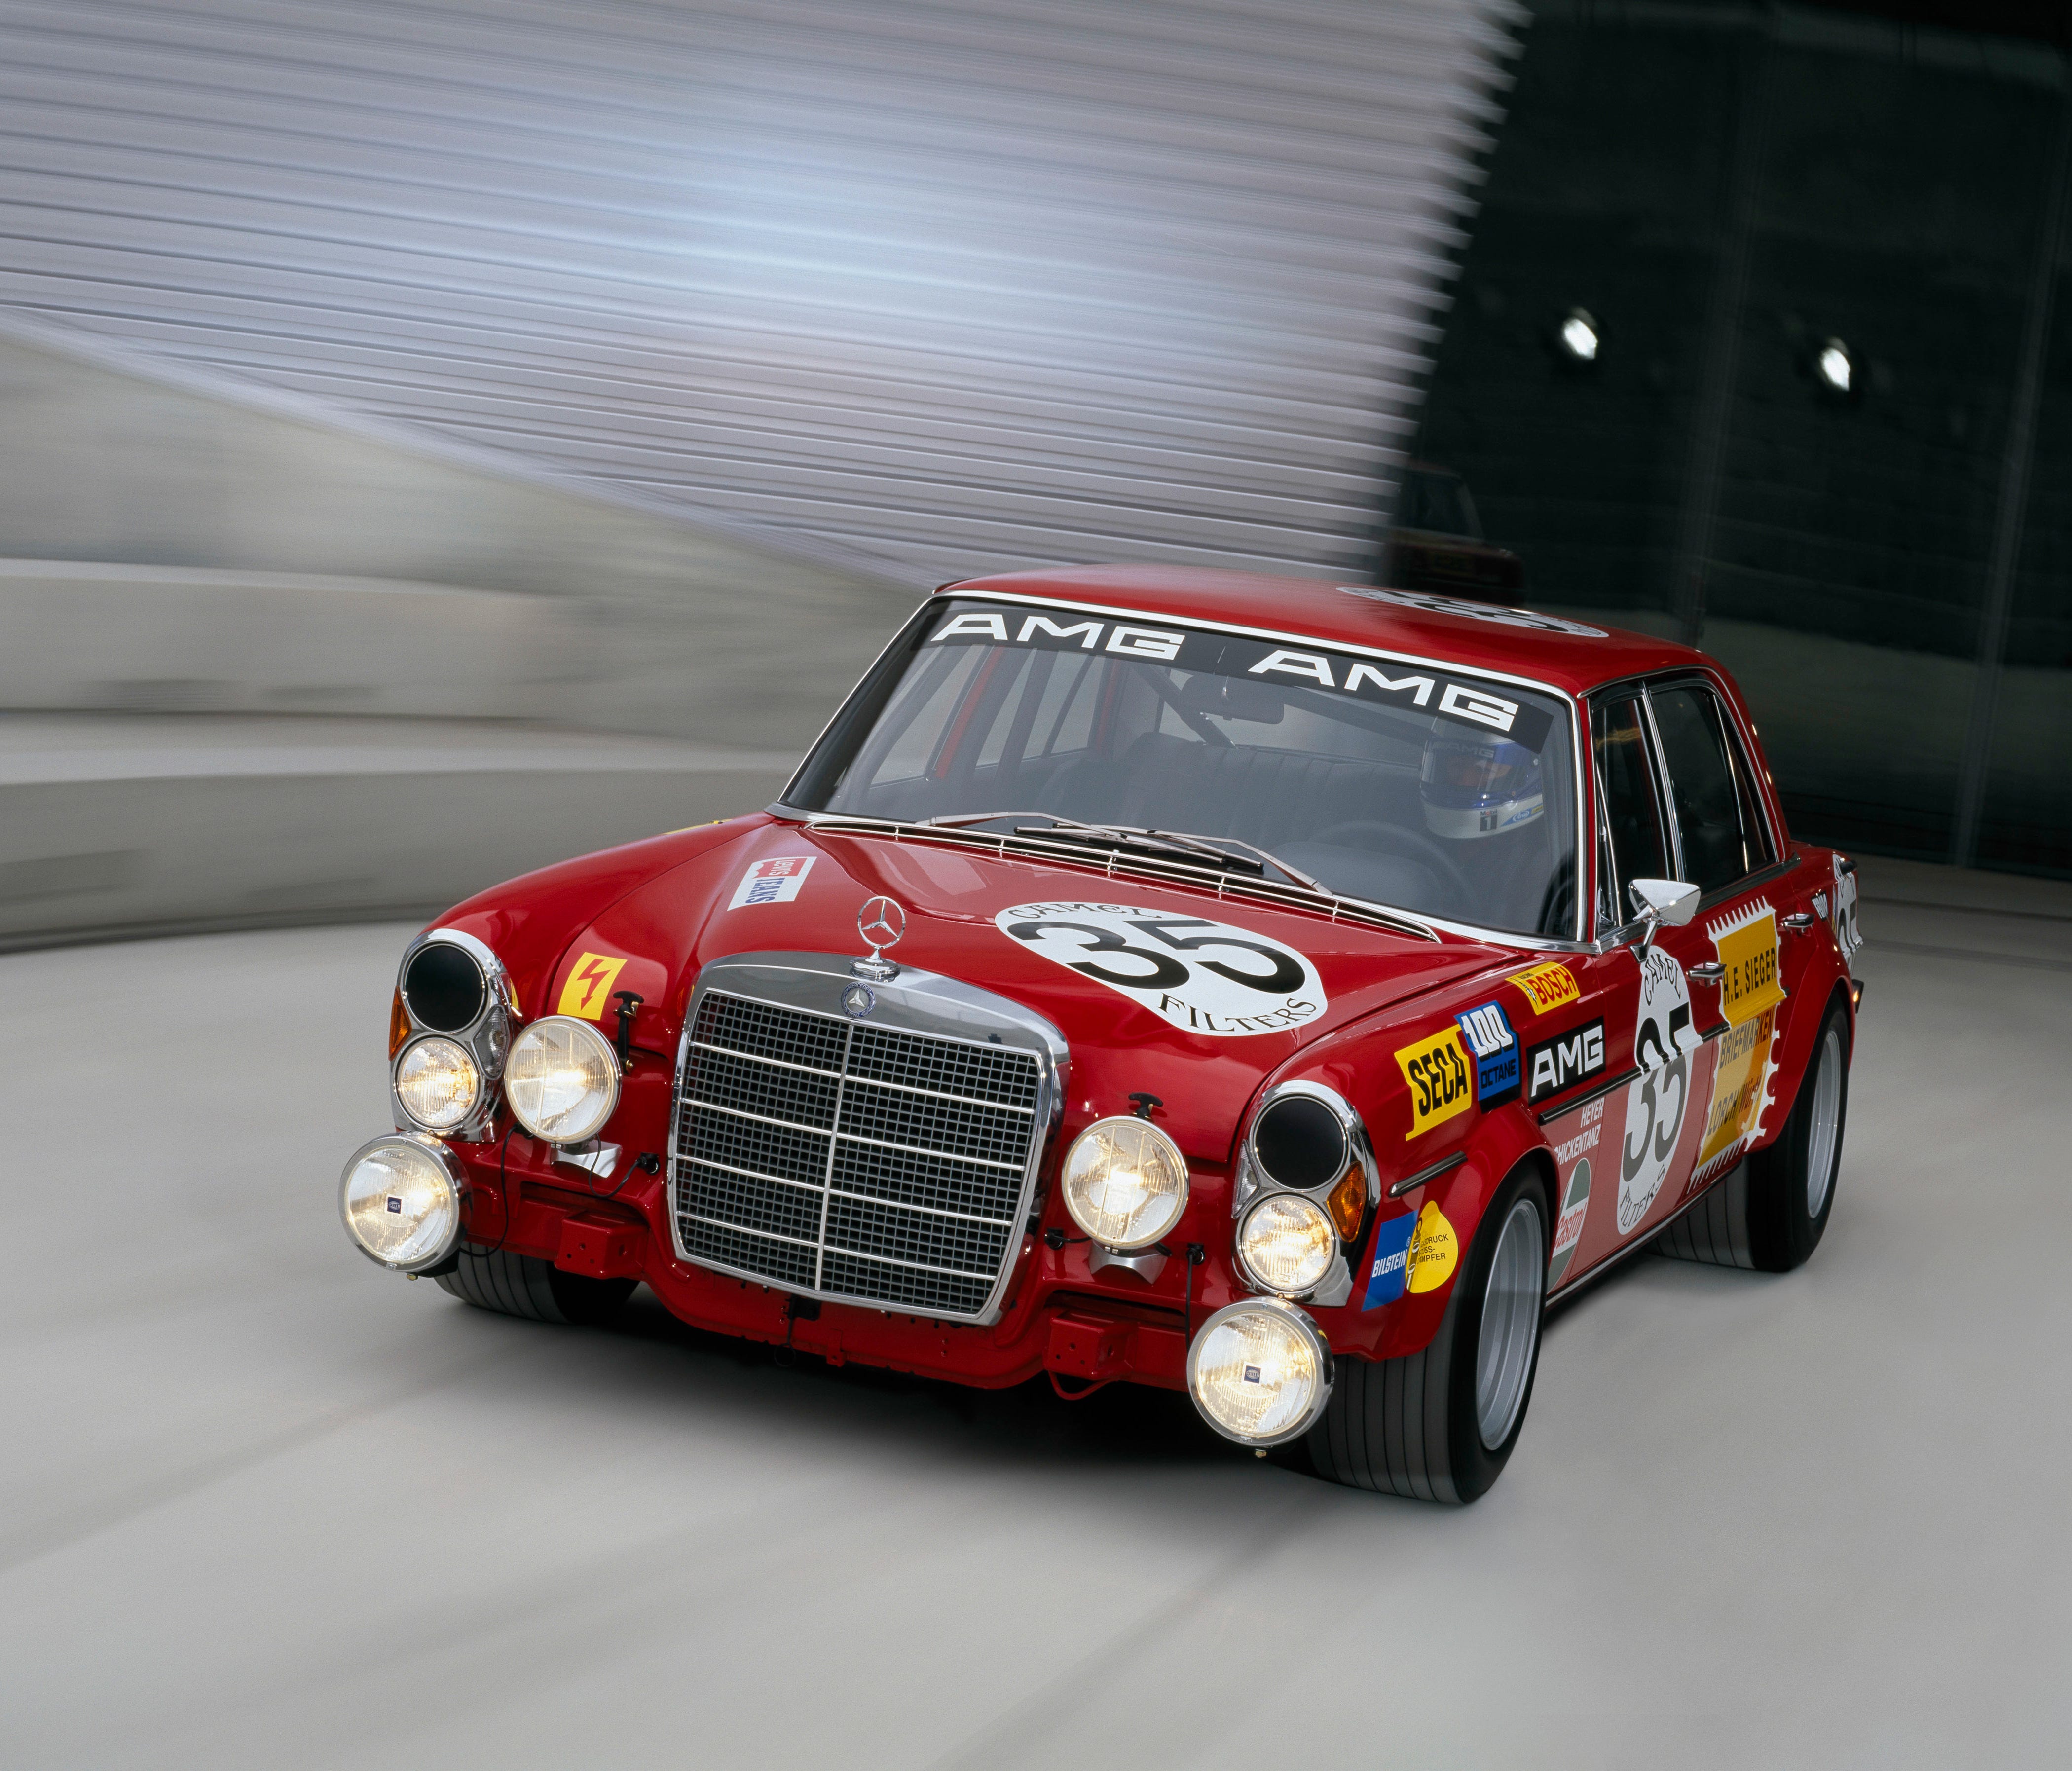 This racing sedan, a Mercedes-Benz 300 SEL highly tweaked by tuner AMG, won international acclaim after triumphing in the 24-hour race at Spa-Francorchamps (Belgium) in 1971. In its first outing, the racing machine secured a class win and second plac